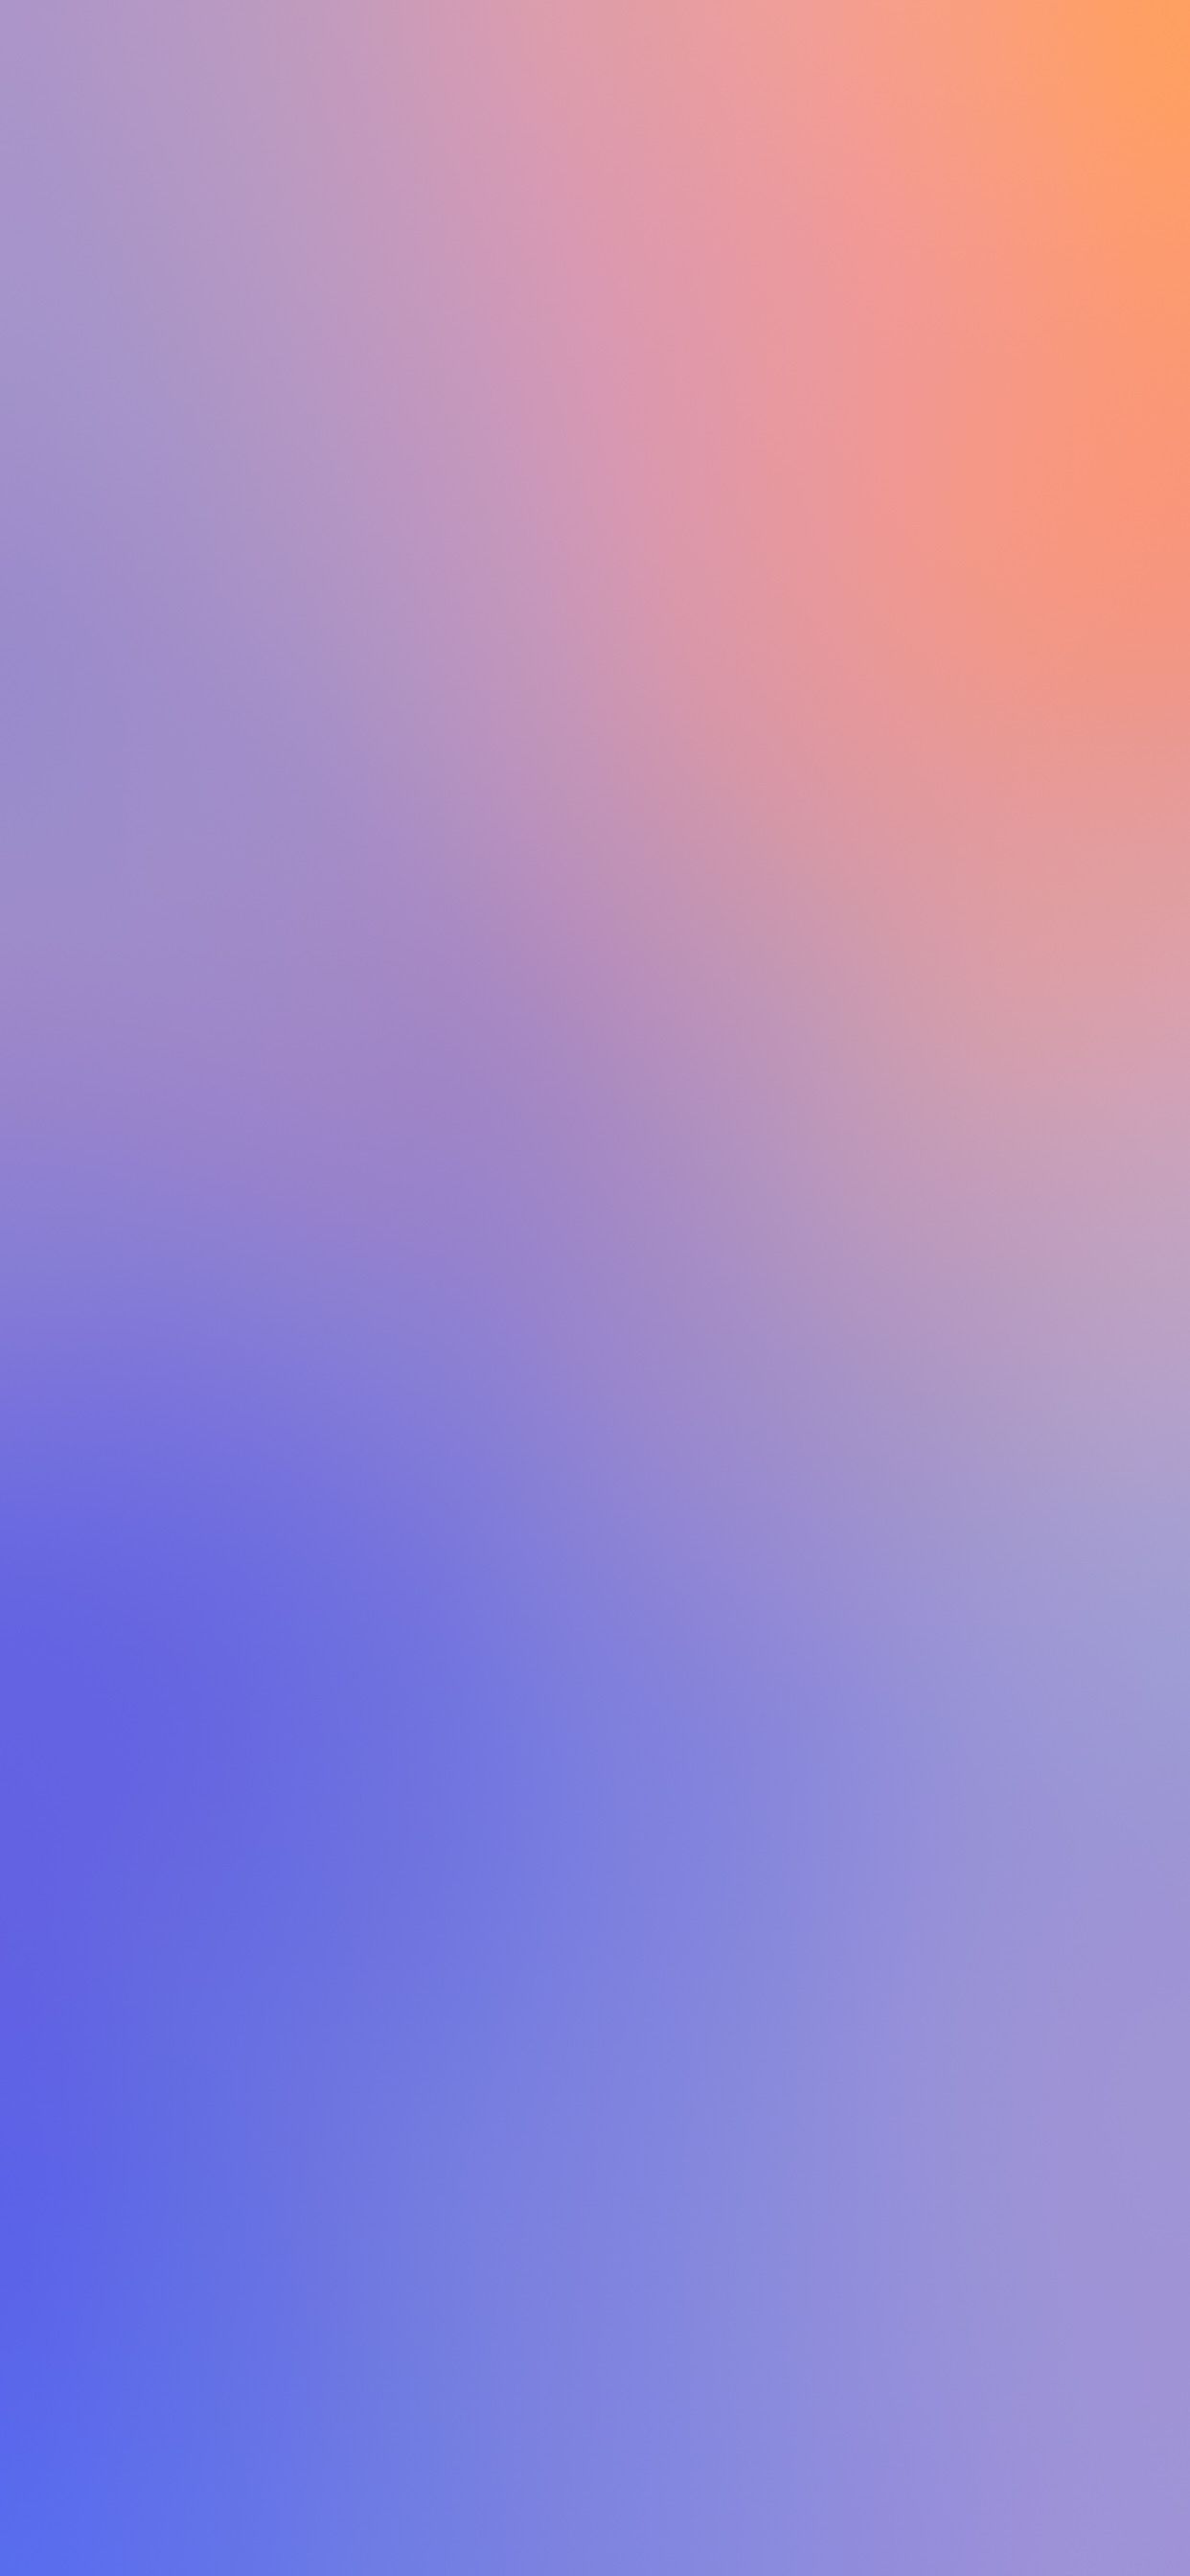 iOS 14 wallpaper gradient inspirations for iPhone and iPad